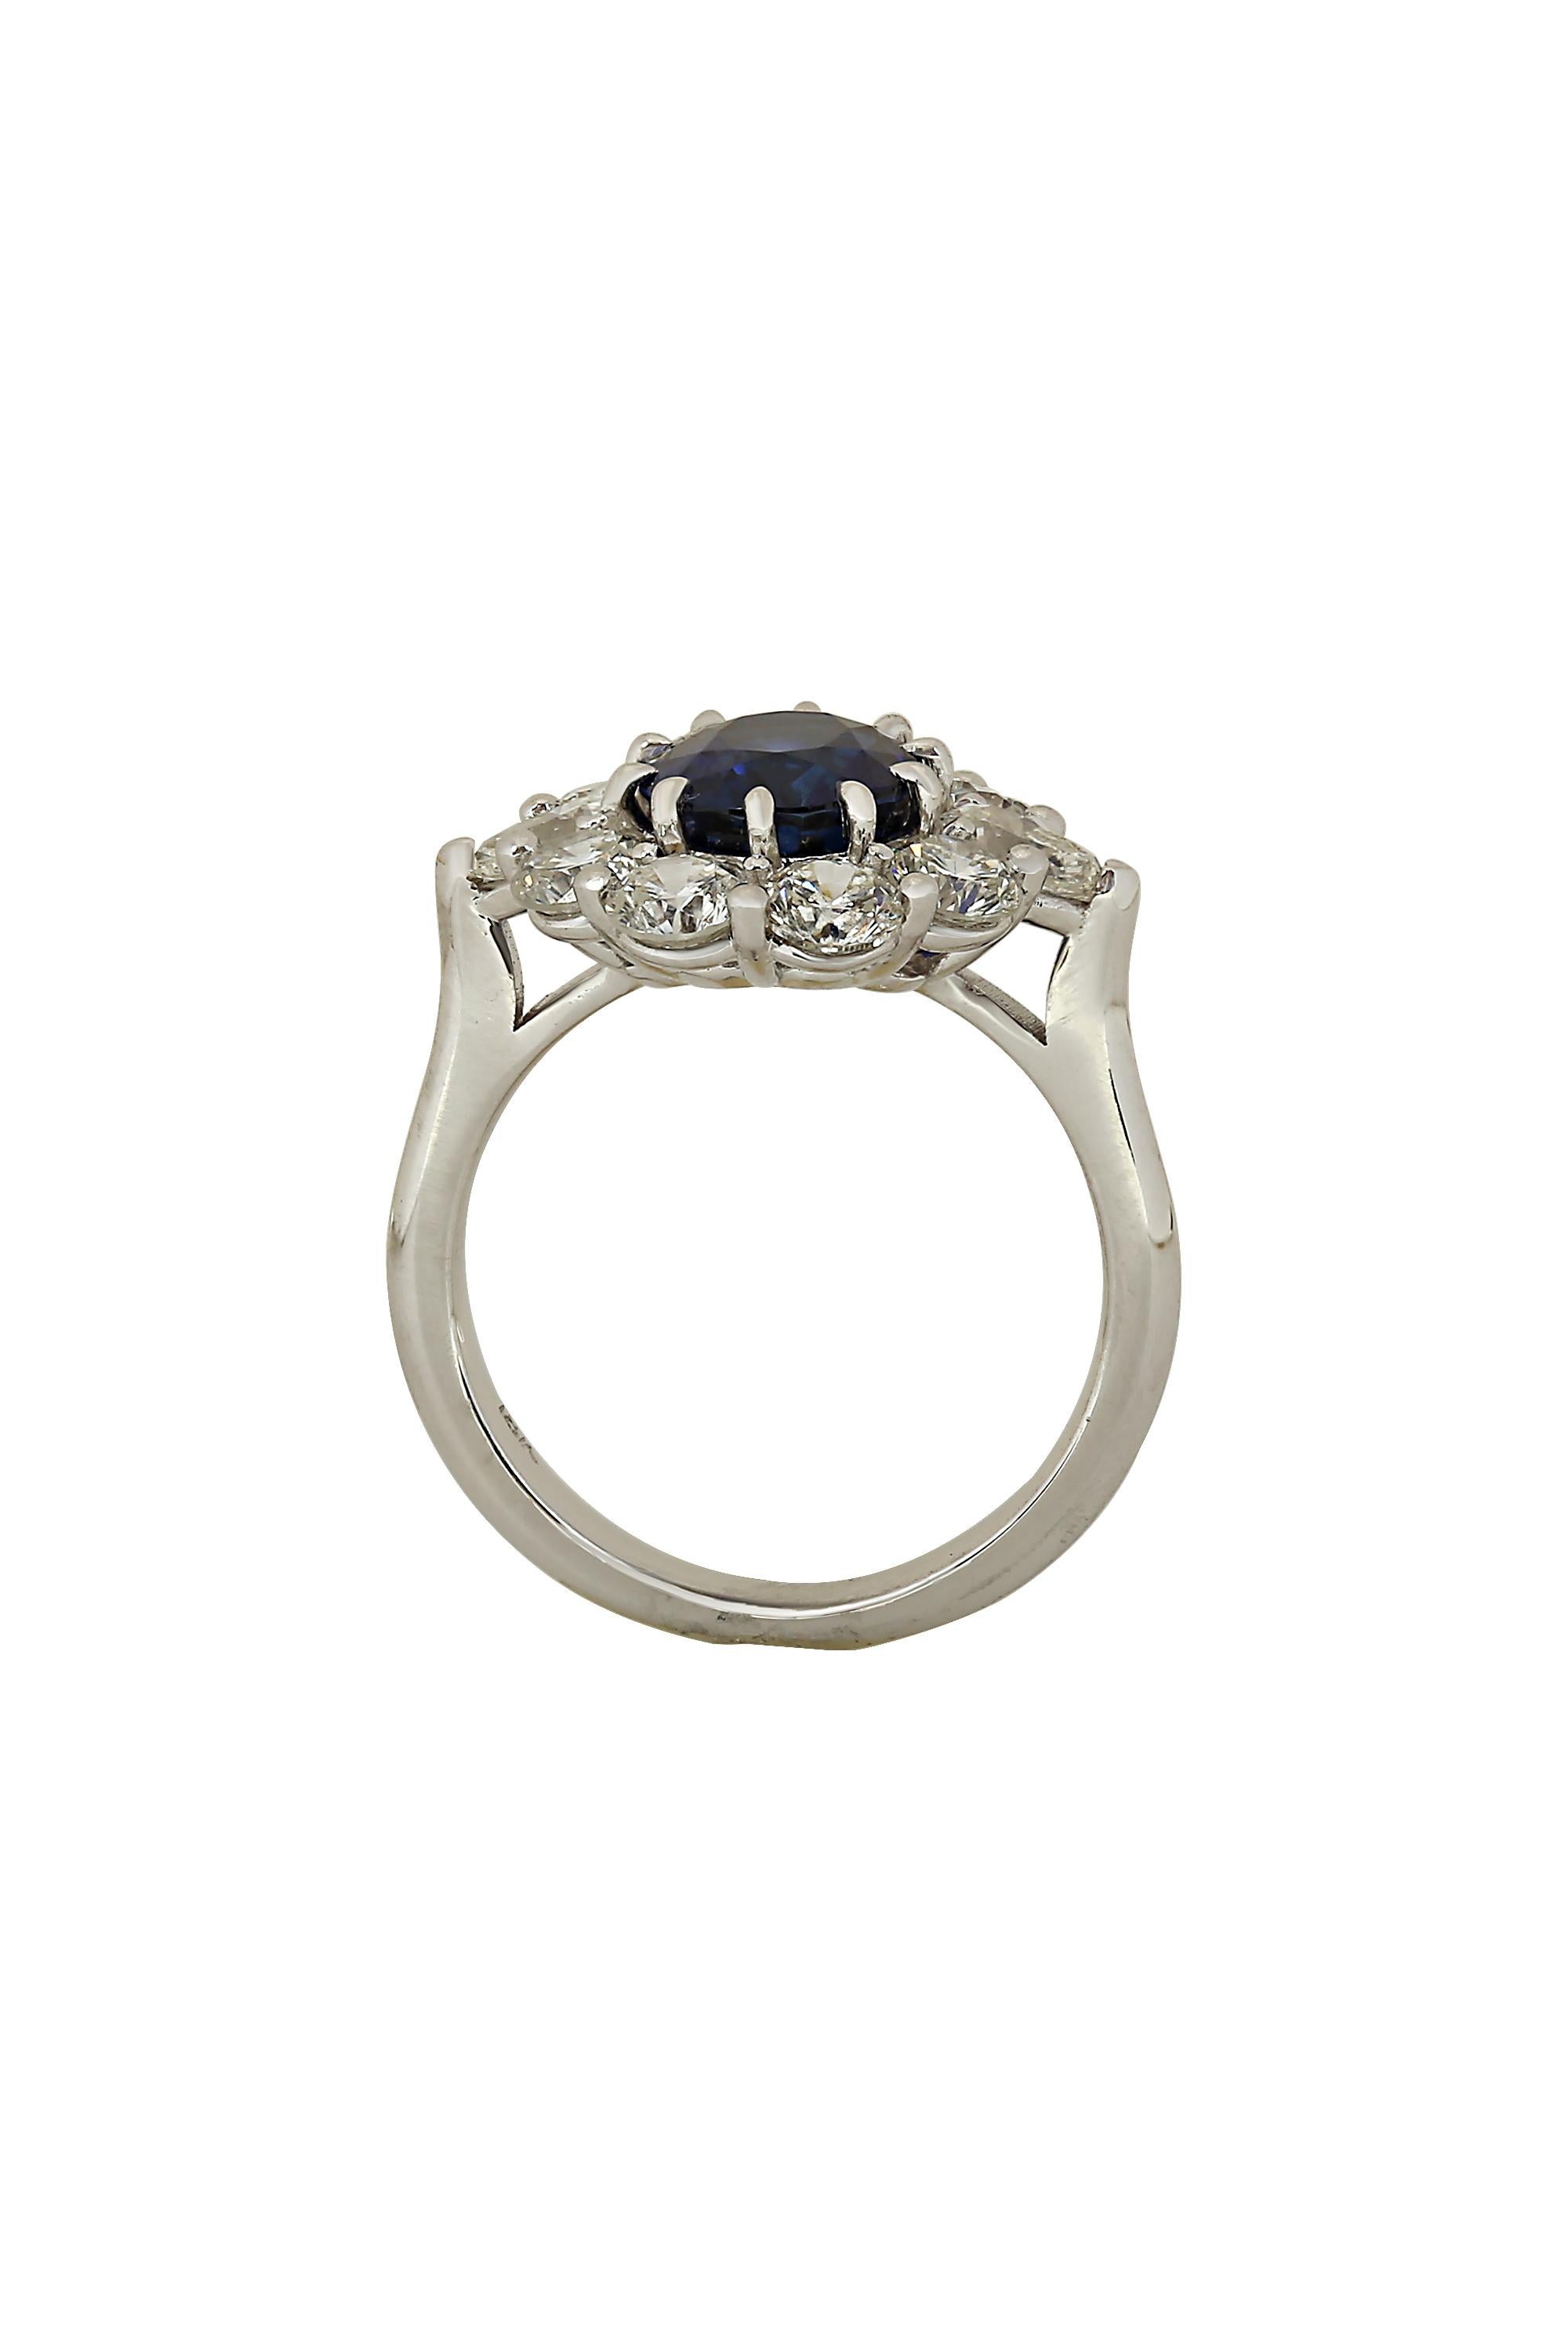 Art Deco Gems Are Forever Oval 2.73 Carat Blue Sapphire and Diamond Ring For Sale